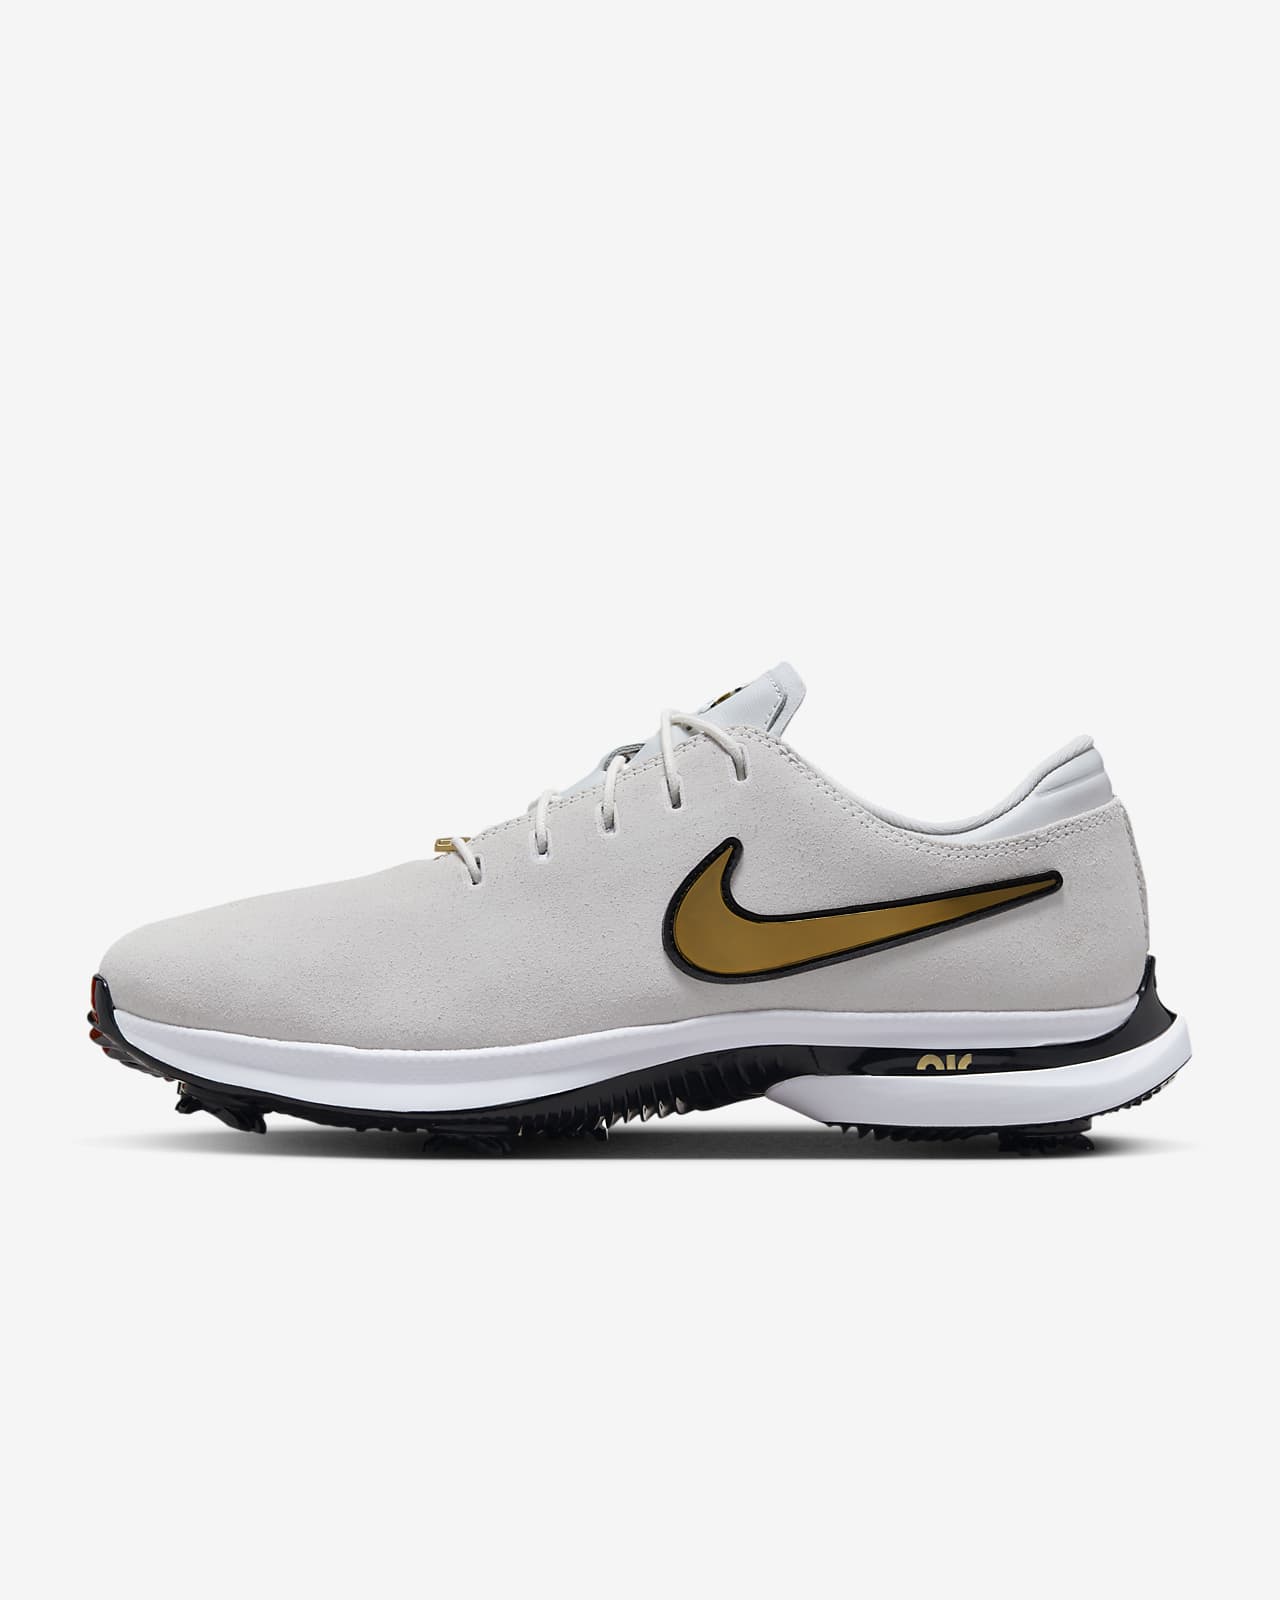 Nike Air Zoom Victory Tour 3 NRG Golf Shoes (Extra Wide)